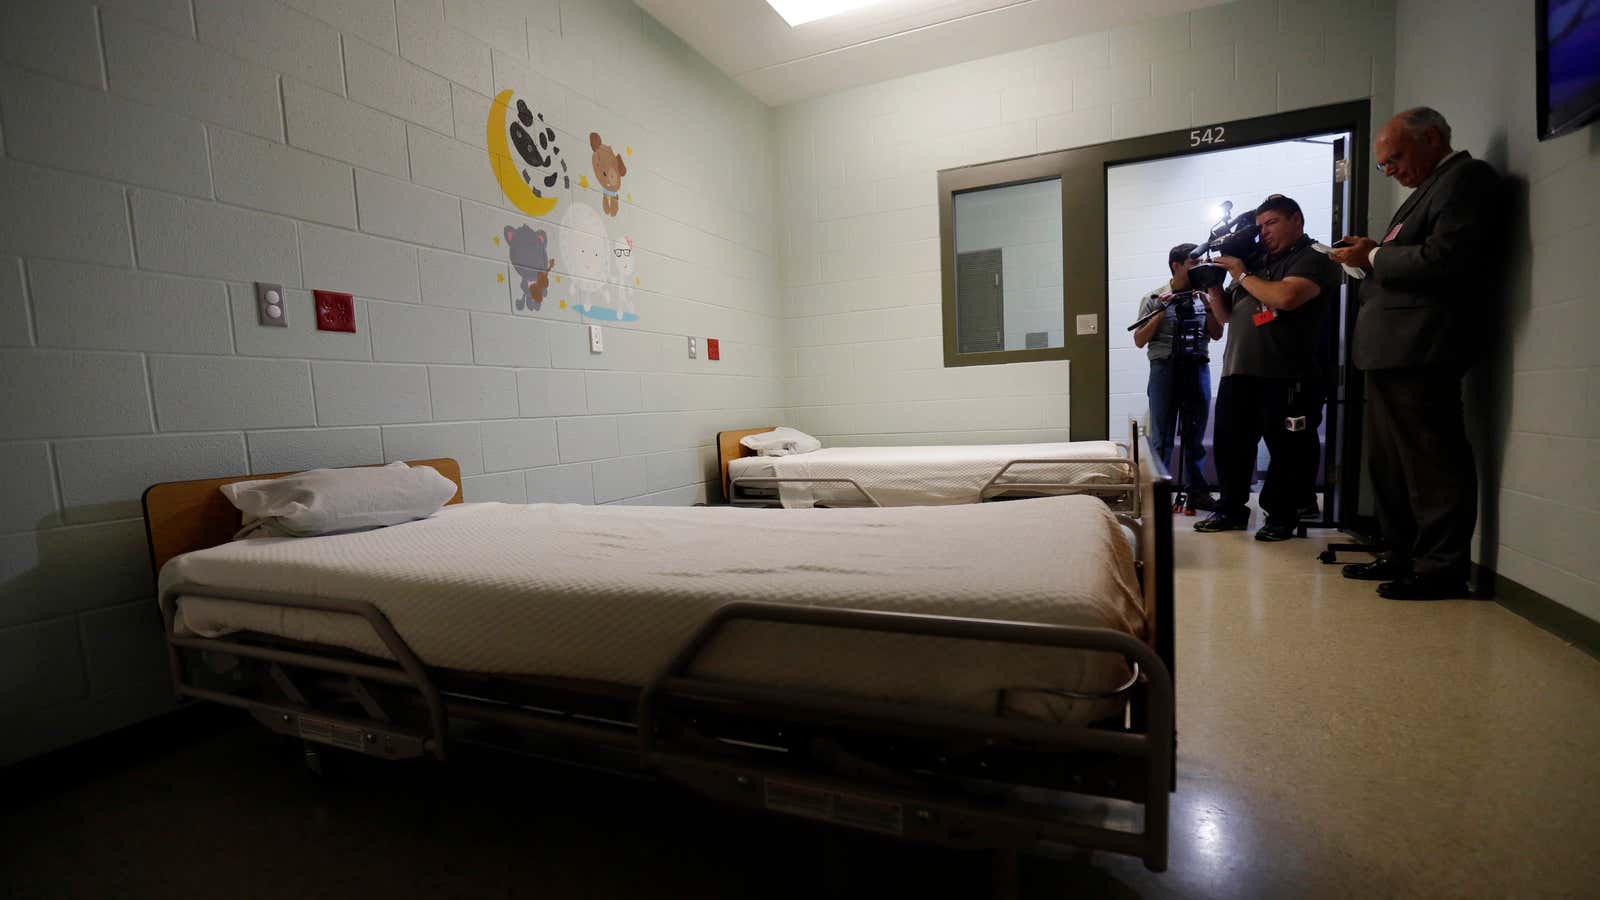 An isolation room at an ICE detention center in Texas.